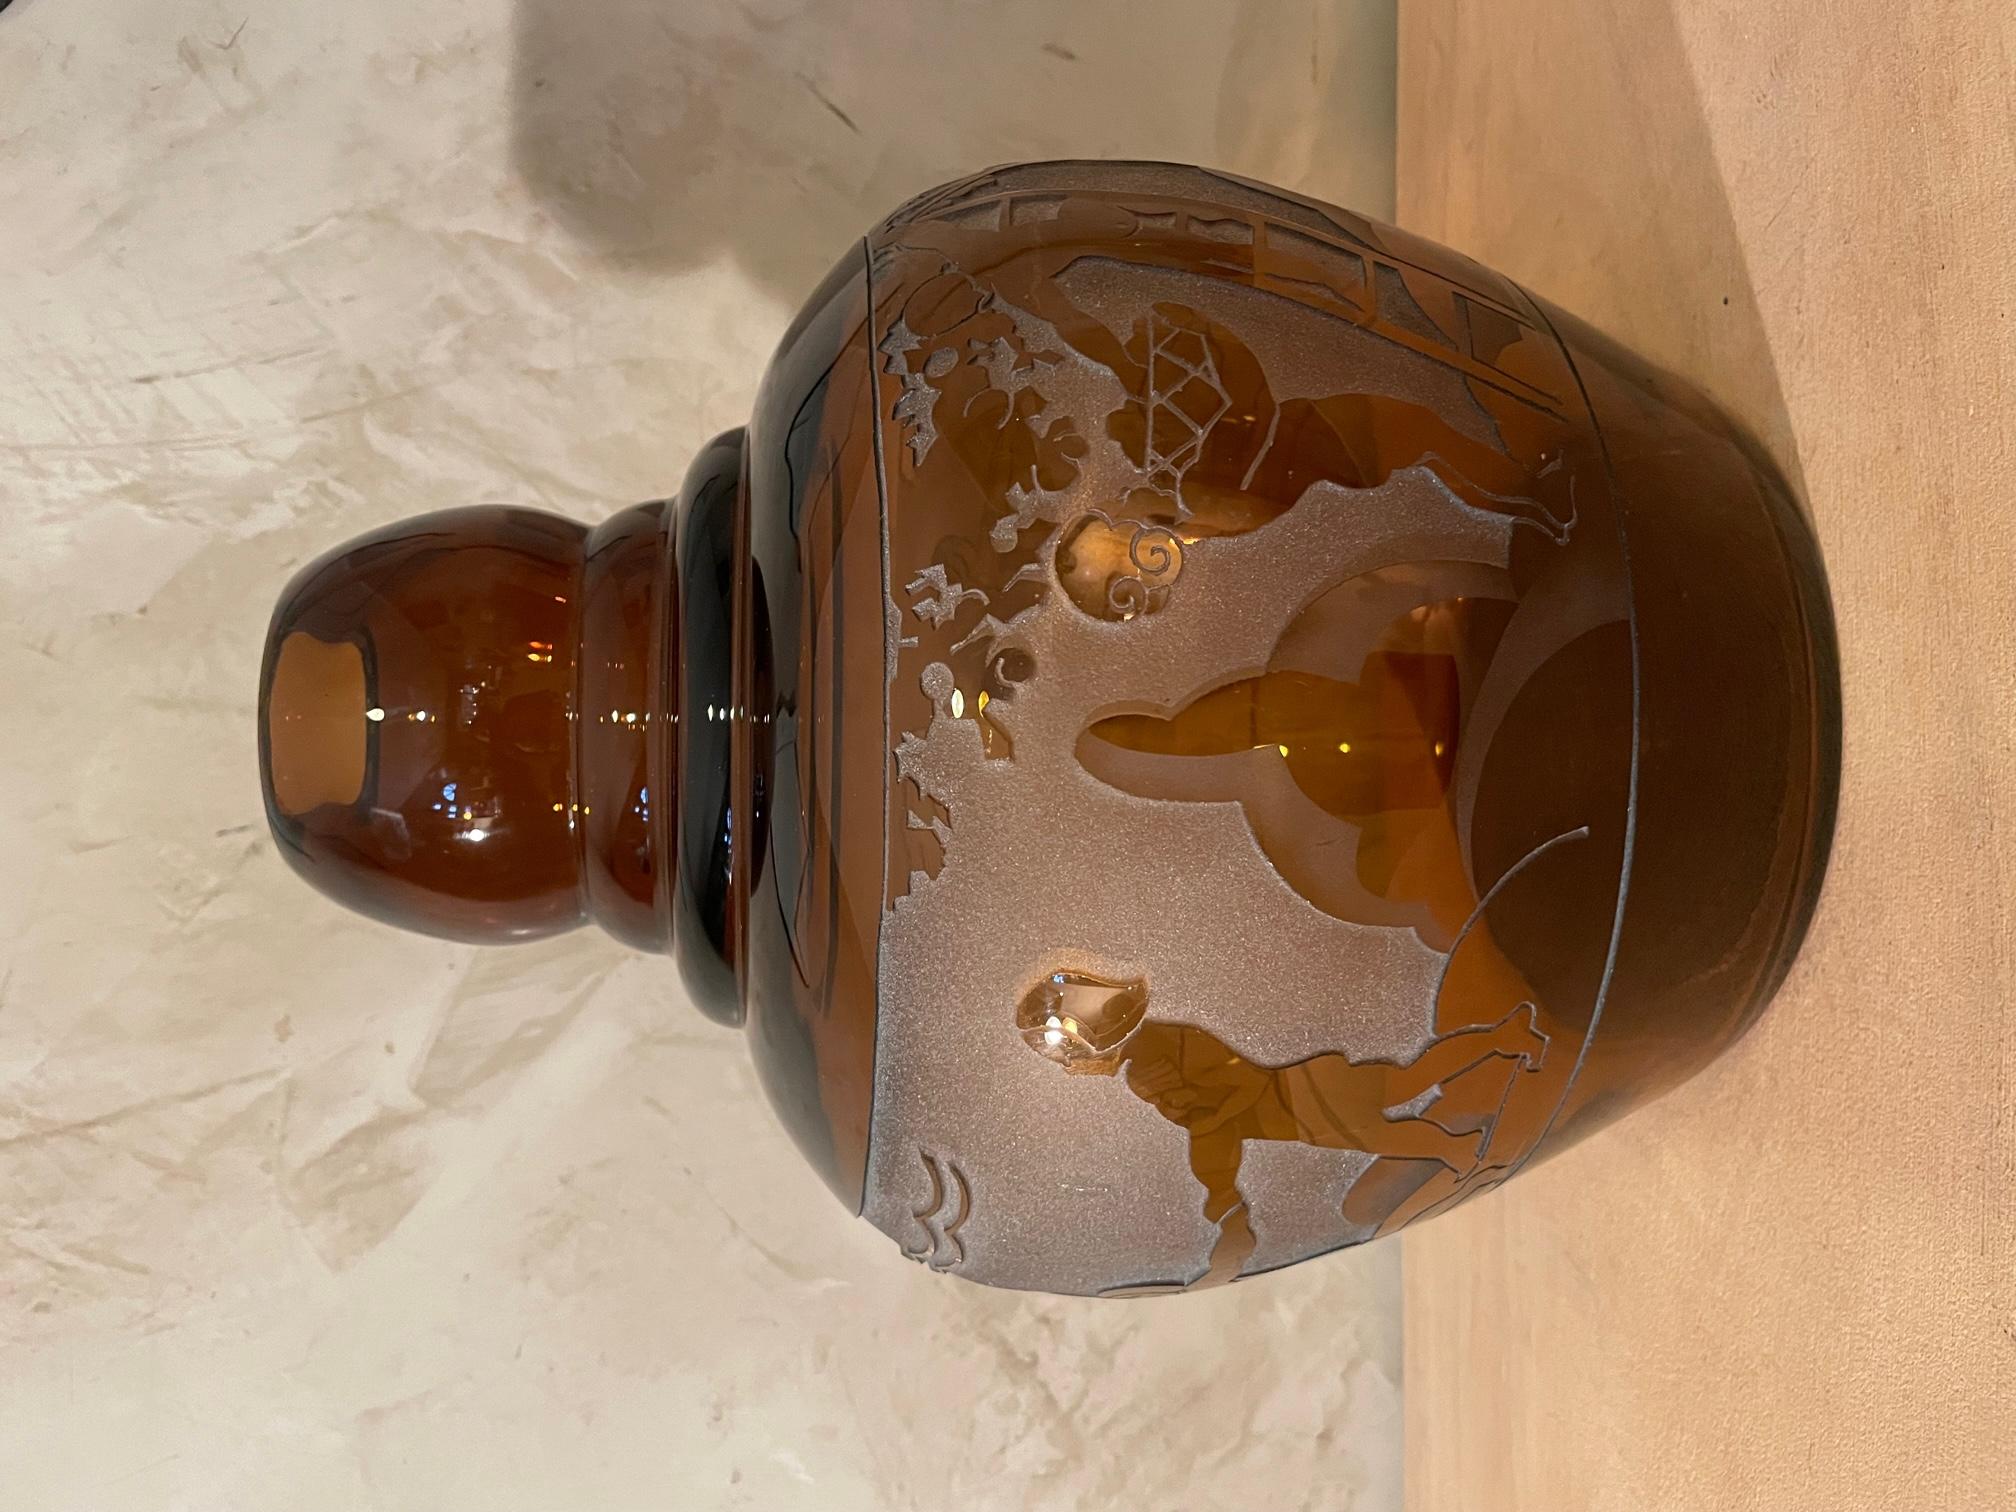 Exceptional French Art deco vase signed Berlys. Fruit picking child decor in etched glass. Signed under the decoration.
Very nice shape, maybe used to be a lamp. Few scratches on the top. 
Excellent quality and rare piece. Beautiful amber color.